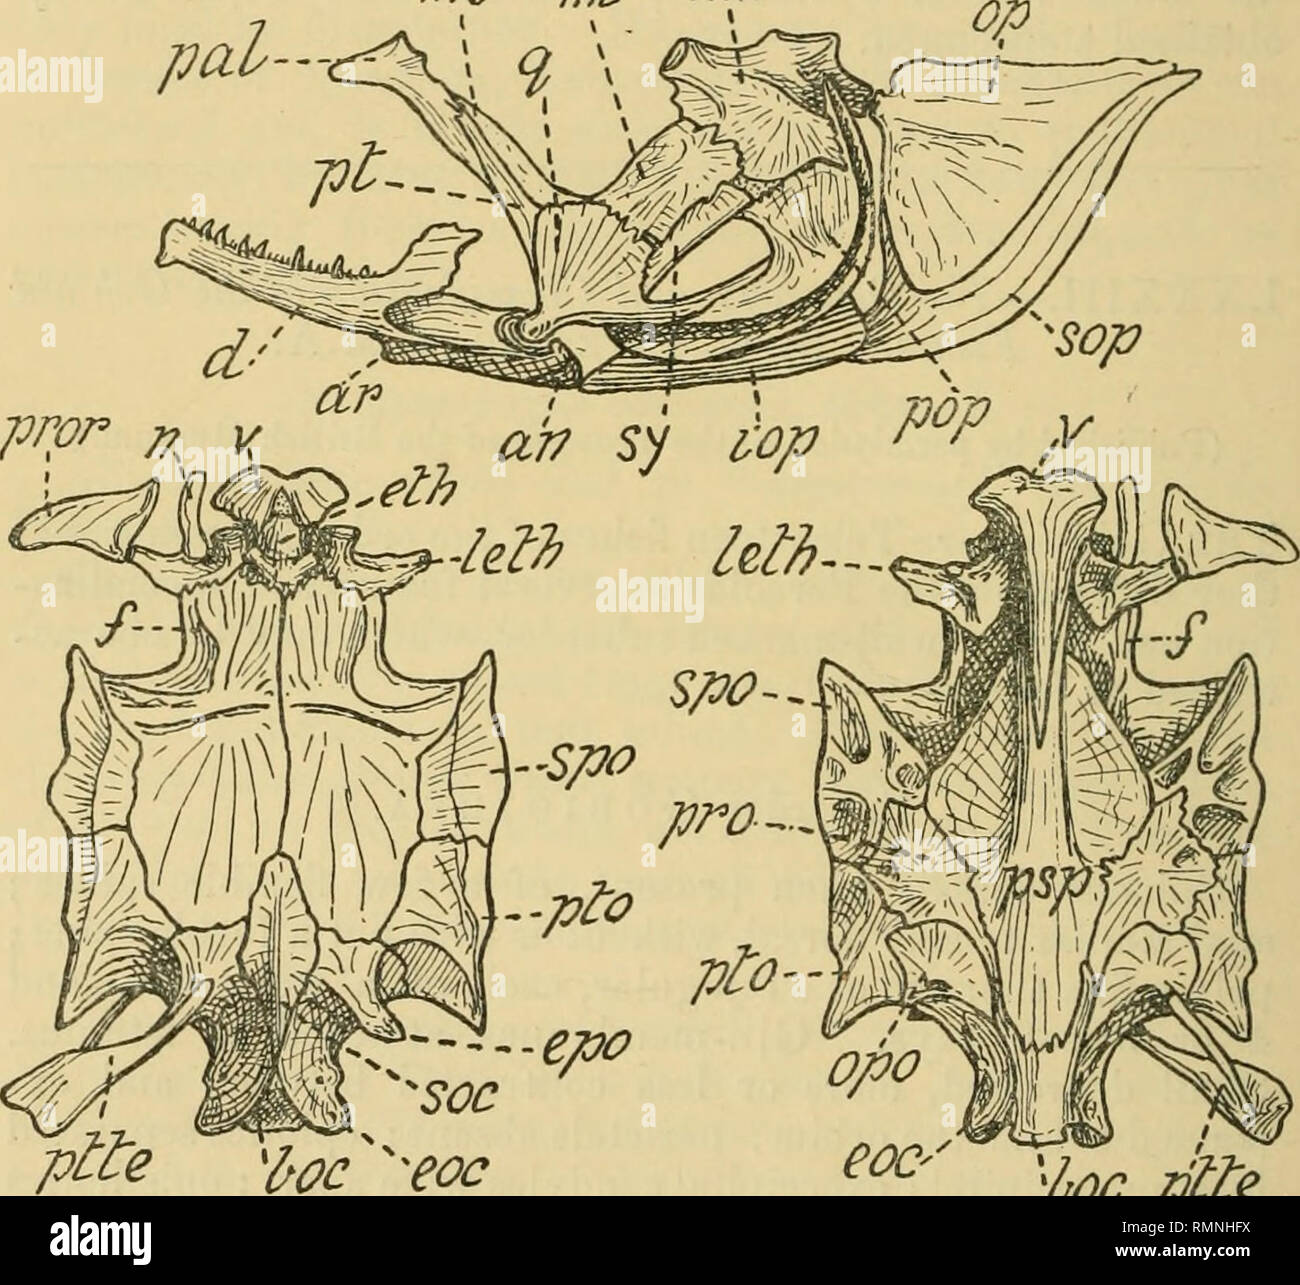 . The Annals and magazine of natural history; zoology, botany, and geology. Natural history; Zoology; Botany; Geology. 730 Mr. C. T. Recran on the Family 1. Eleotridae. Pelvic fins separate. Palatine with an asconding stem articulating directly with a lateral ethmoid apopliysis behind the origin of the maxillary process; mesopterygoid narrow, Fig. 1. mS ml ^777. ''hoc /^ile Eleotris marmorata. Lower jaw, hyo-palatiue and opercular bones, and skull seen from above and from below. d, dentary ; ar, articulare ; an, angulare ; pal, palatine ; j)t, pterygoid ; ins, mesoptervgoid; int, metapterygoid Stock Photo